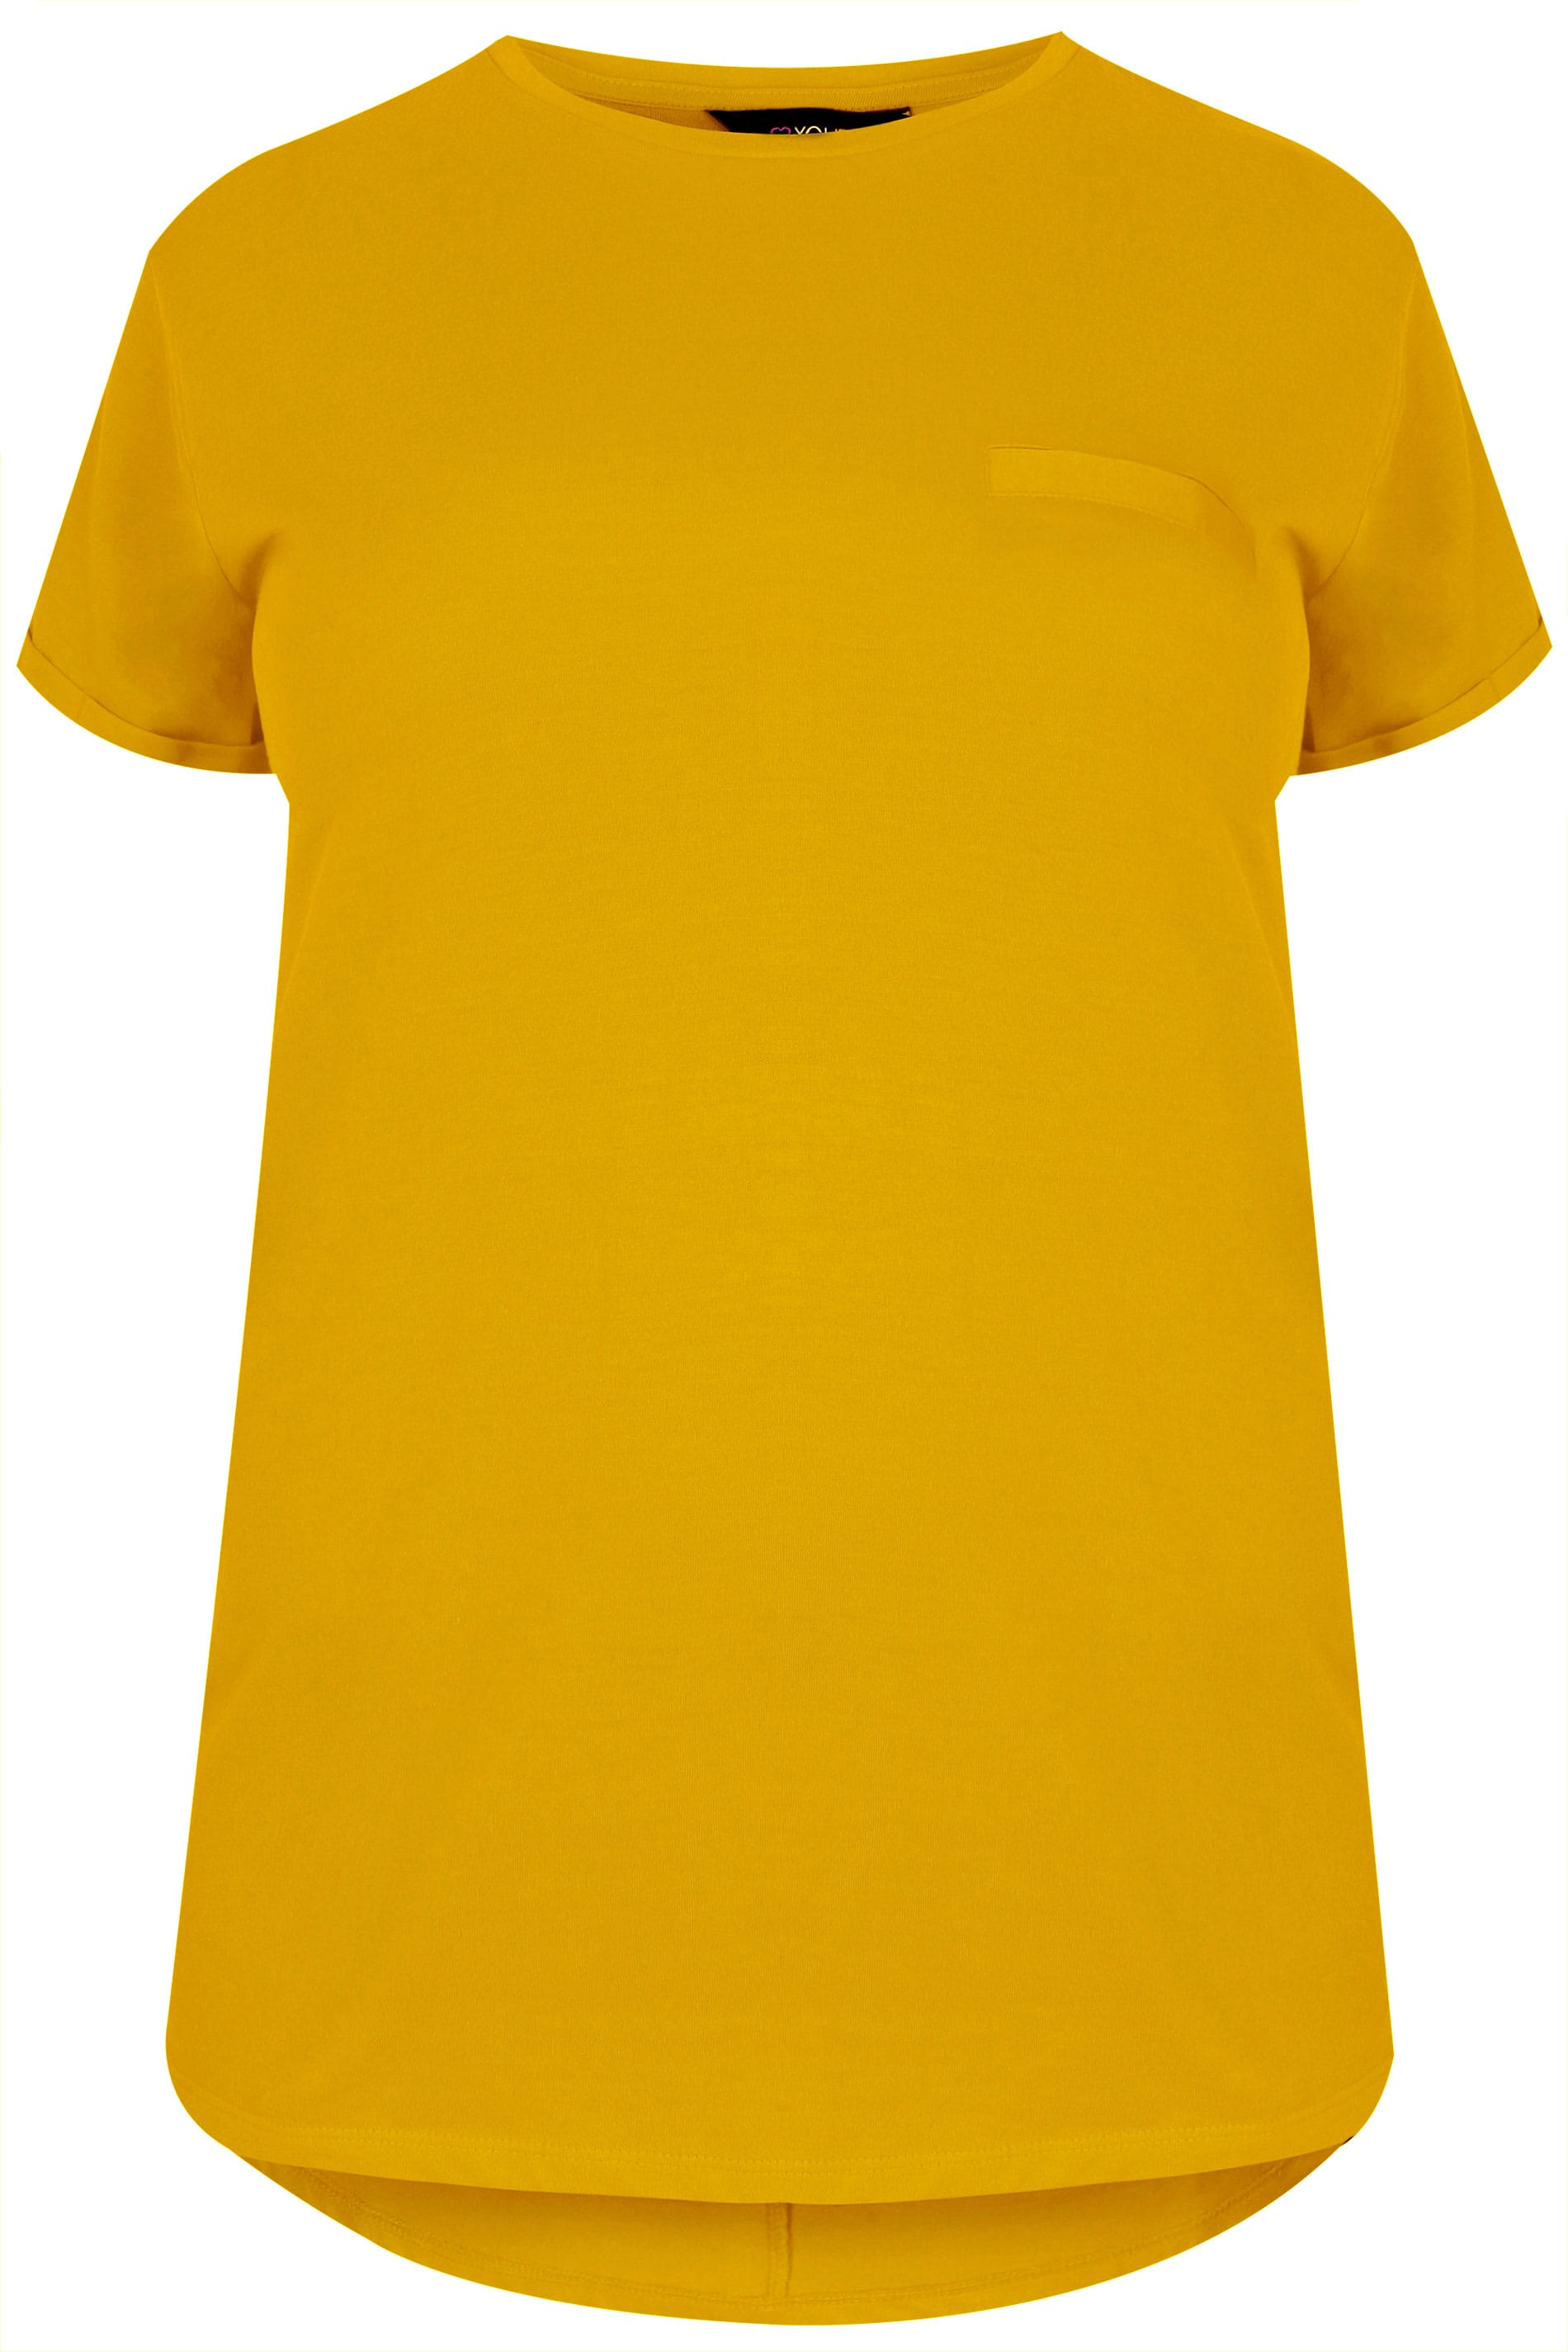 Download Mustard Yellow Mock Pocket T-Shirt With Curved Hem, plus size 16 to 36